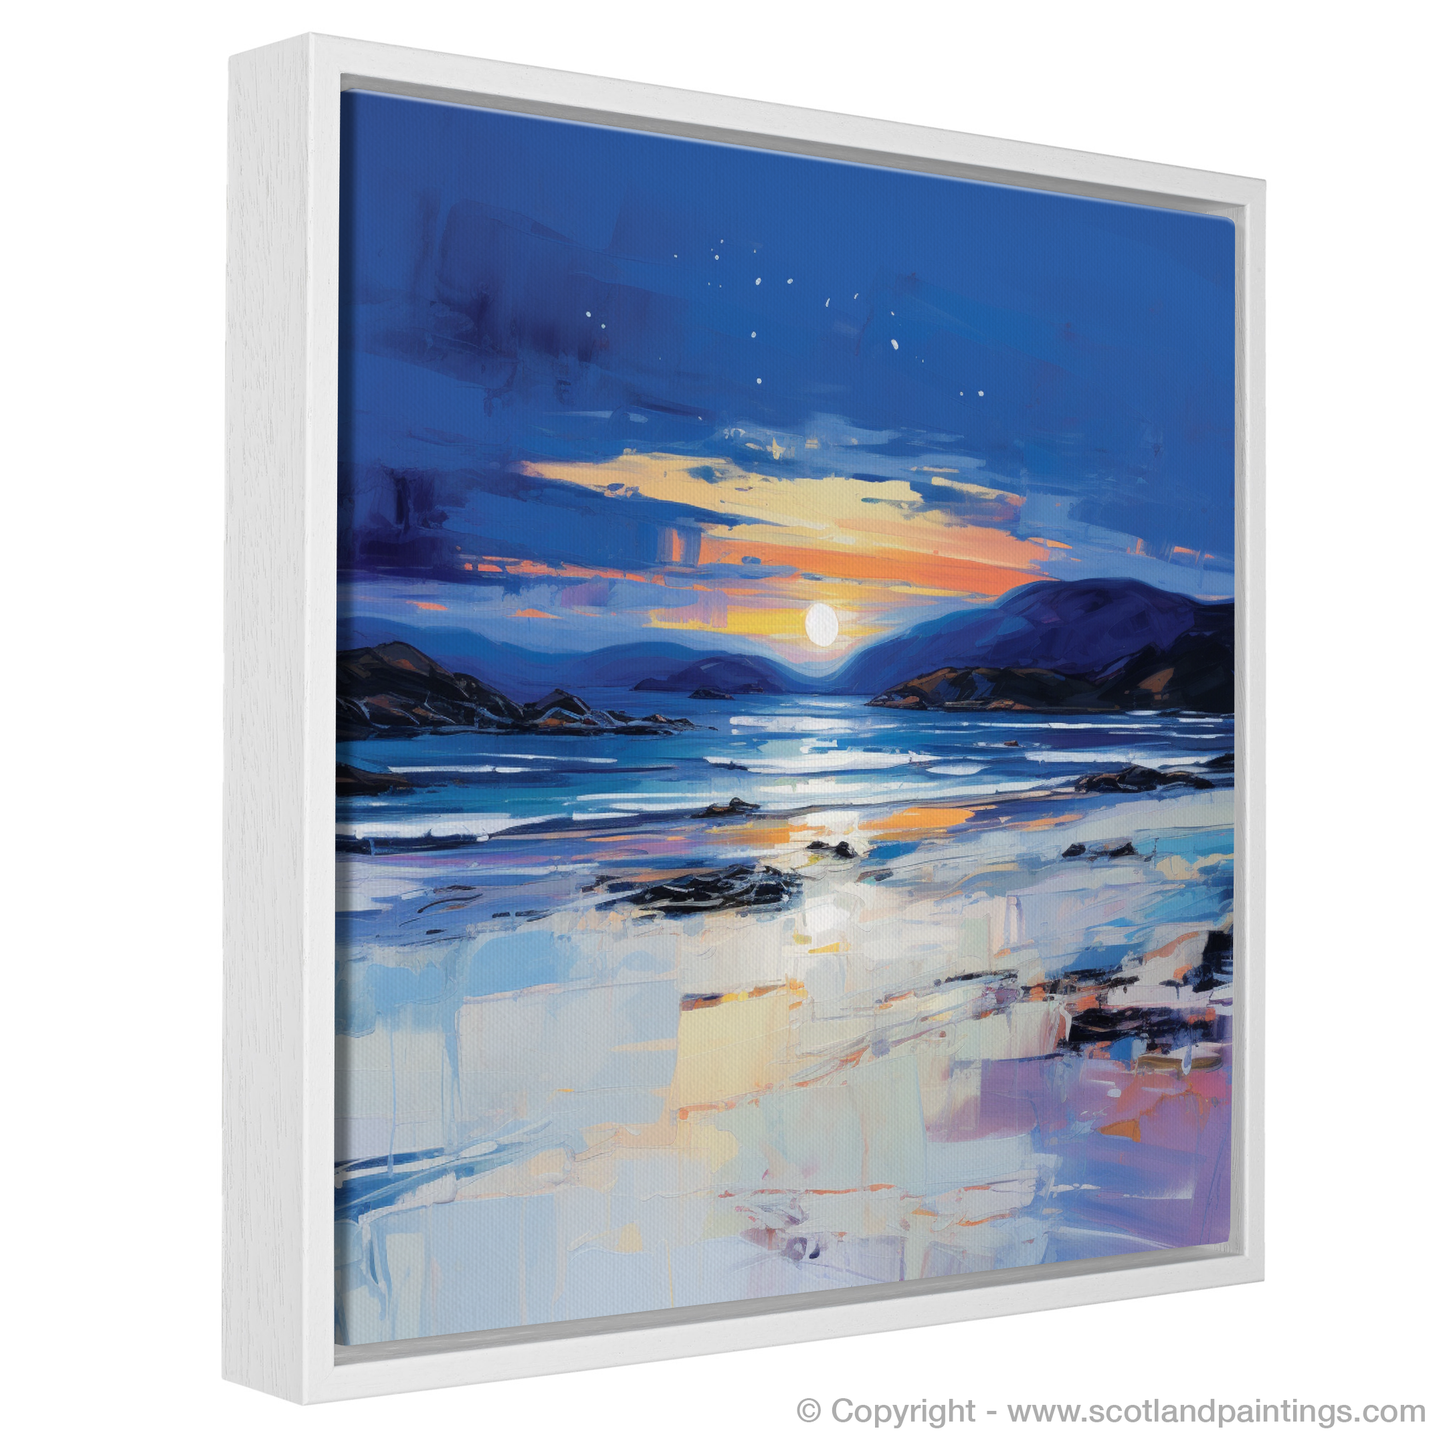 Painting and Art Print of Traigh Mhor at dusk entitled "Twilight Serenity at Traigh Mhor".